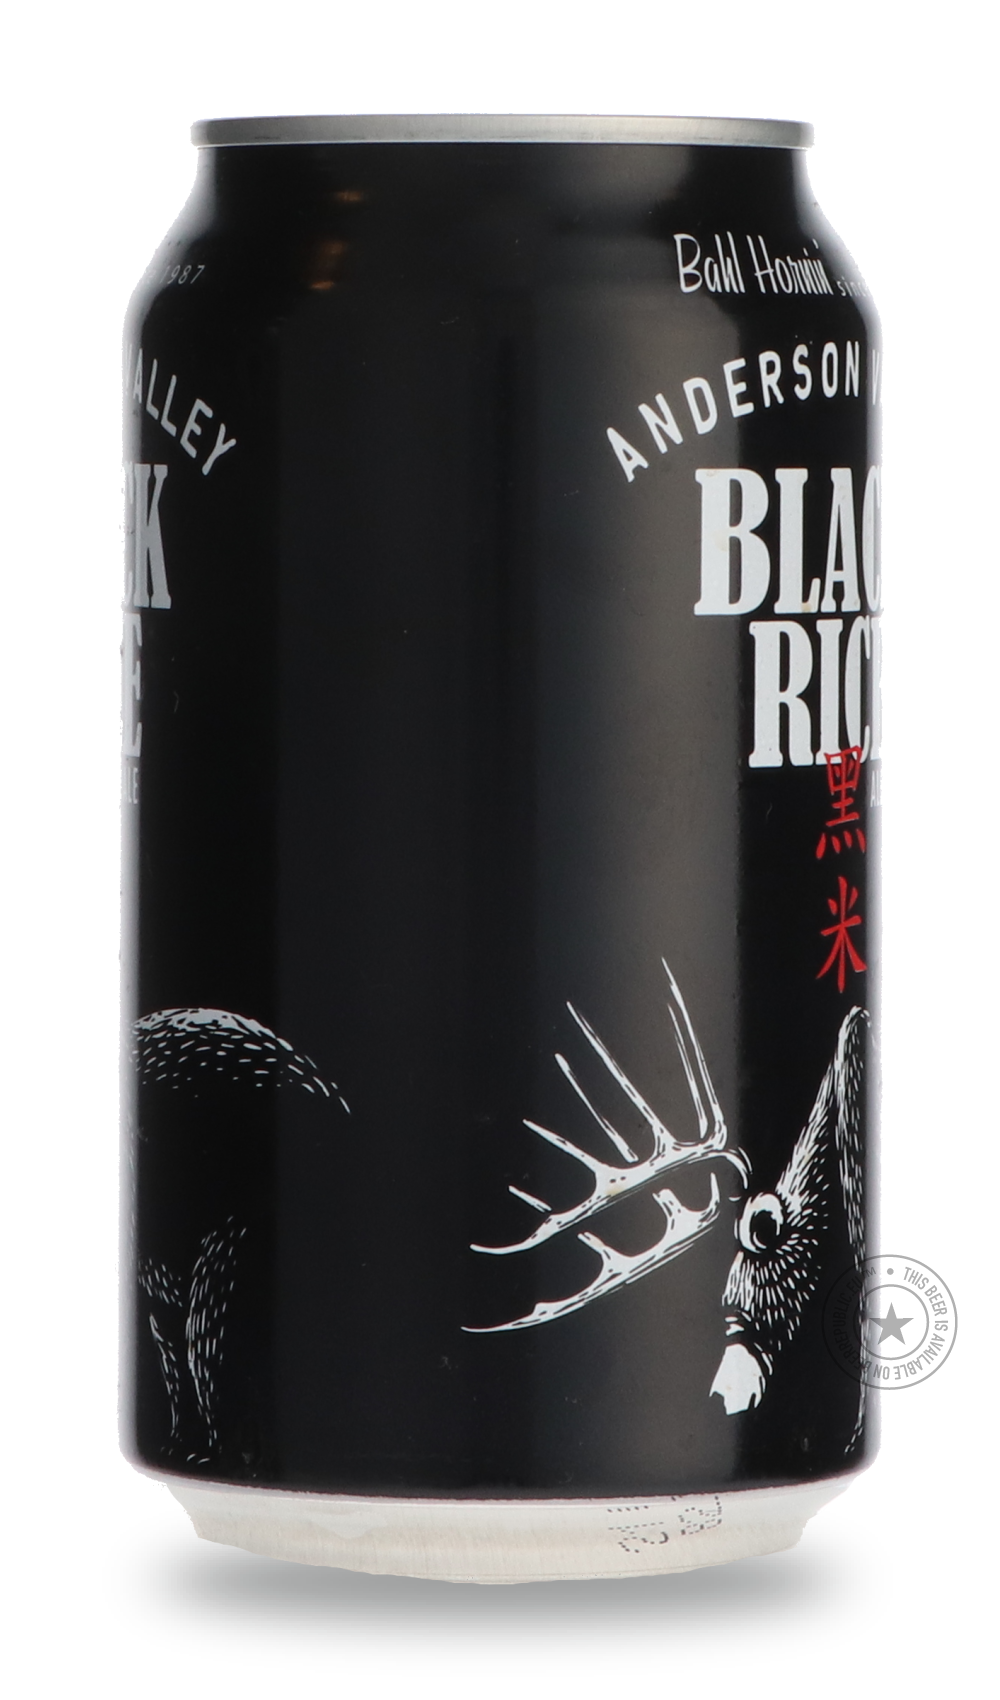 -Anderson Valley- Black Rice Ale-Brown & Dark- Only @ Beer Republic - The best online beer store for American & Canadian craft beer - Buy beer online from the USA and Canada - Bier online kopen - Amerikaans bier kopen - Craft beer store - Craft beer kopen - Amerikanisch bier kaufen - Bier online kaufen - Acheter biere online - IPA - Stout - Porter - New England IPA - Hazy IPA - Imperial Stout - Barrel Aged - Barrel Aged Imperial Stout - Brown - Dark beer - Blond - Blonde - Pilsner - Lager - Wheat - Weizen -